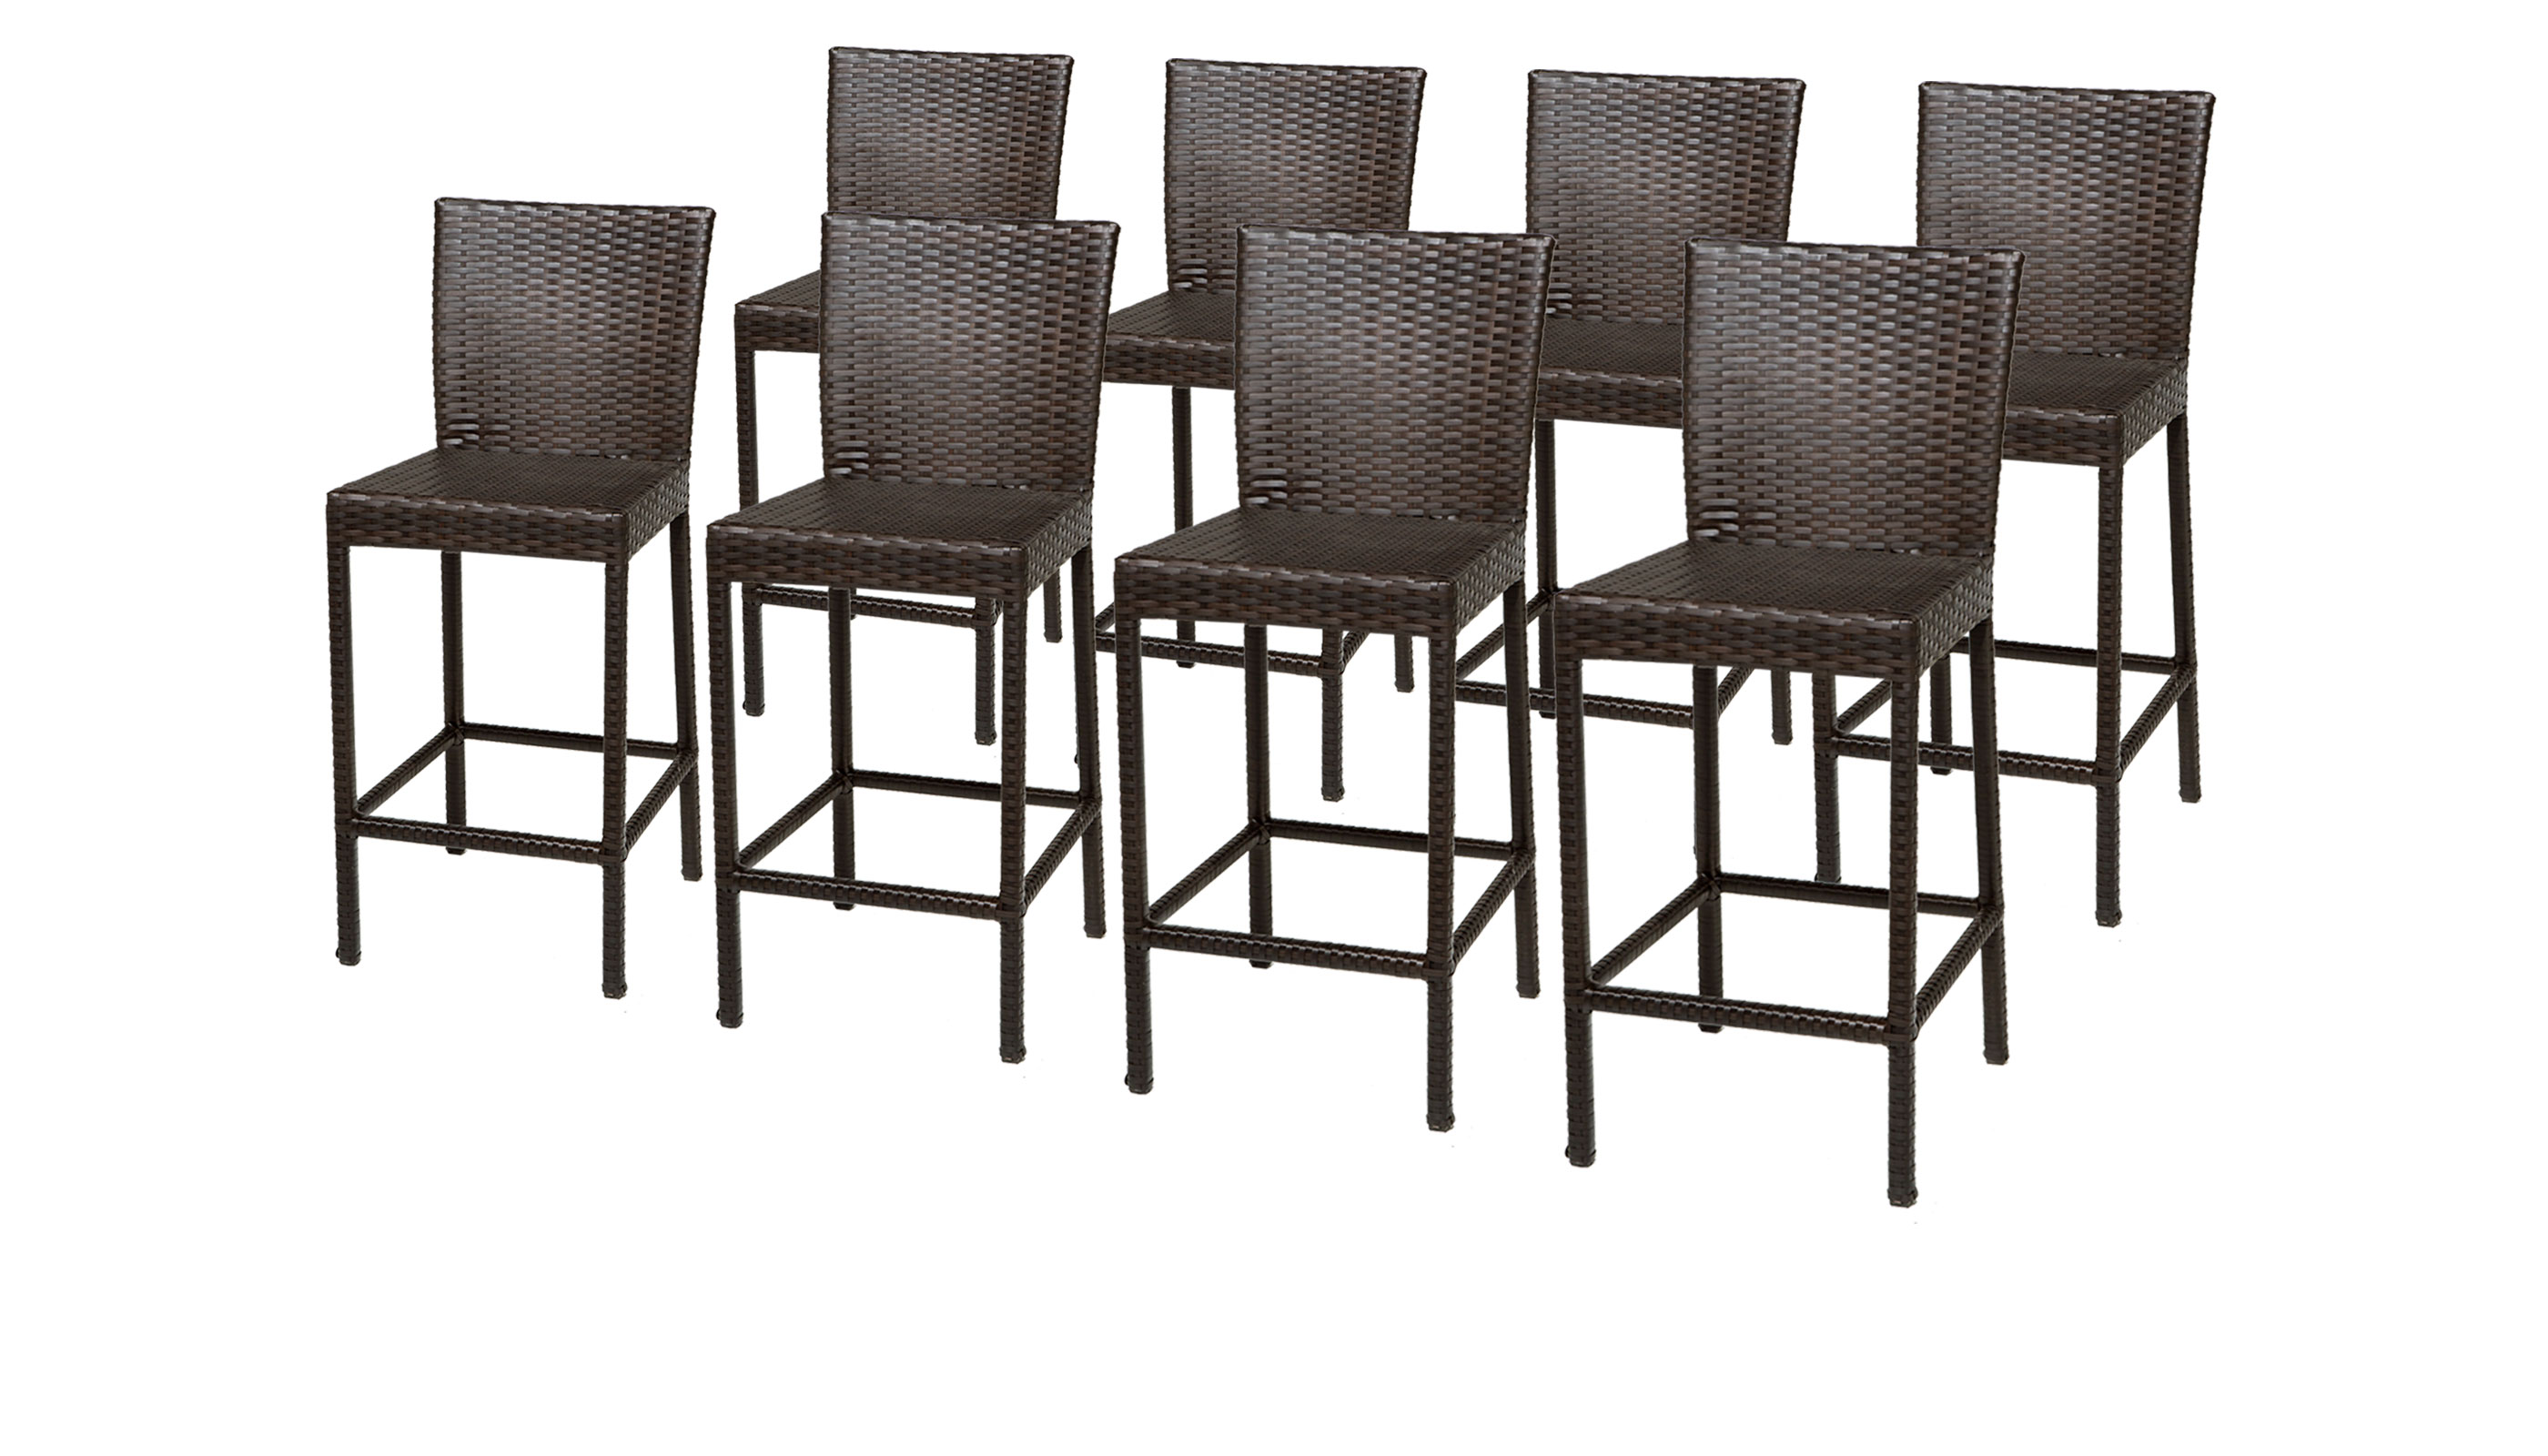 Barbados Pub Table Set With Barstools 8 Piece Outdoor Wicker Patio Furniture - TK Classics